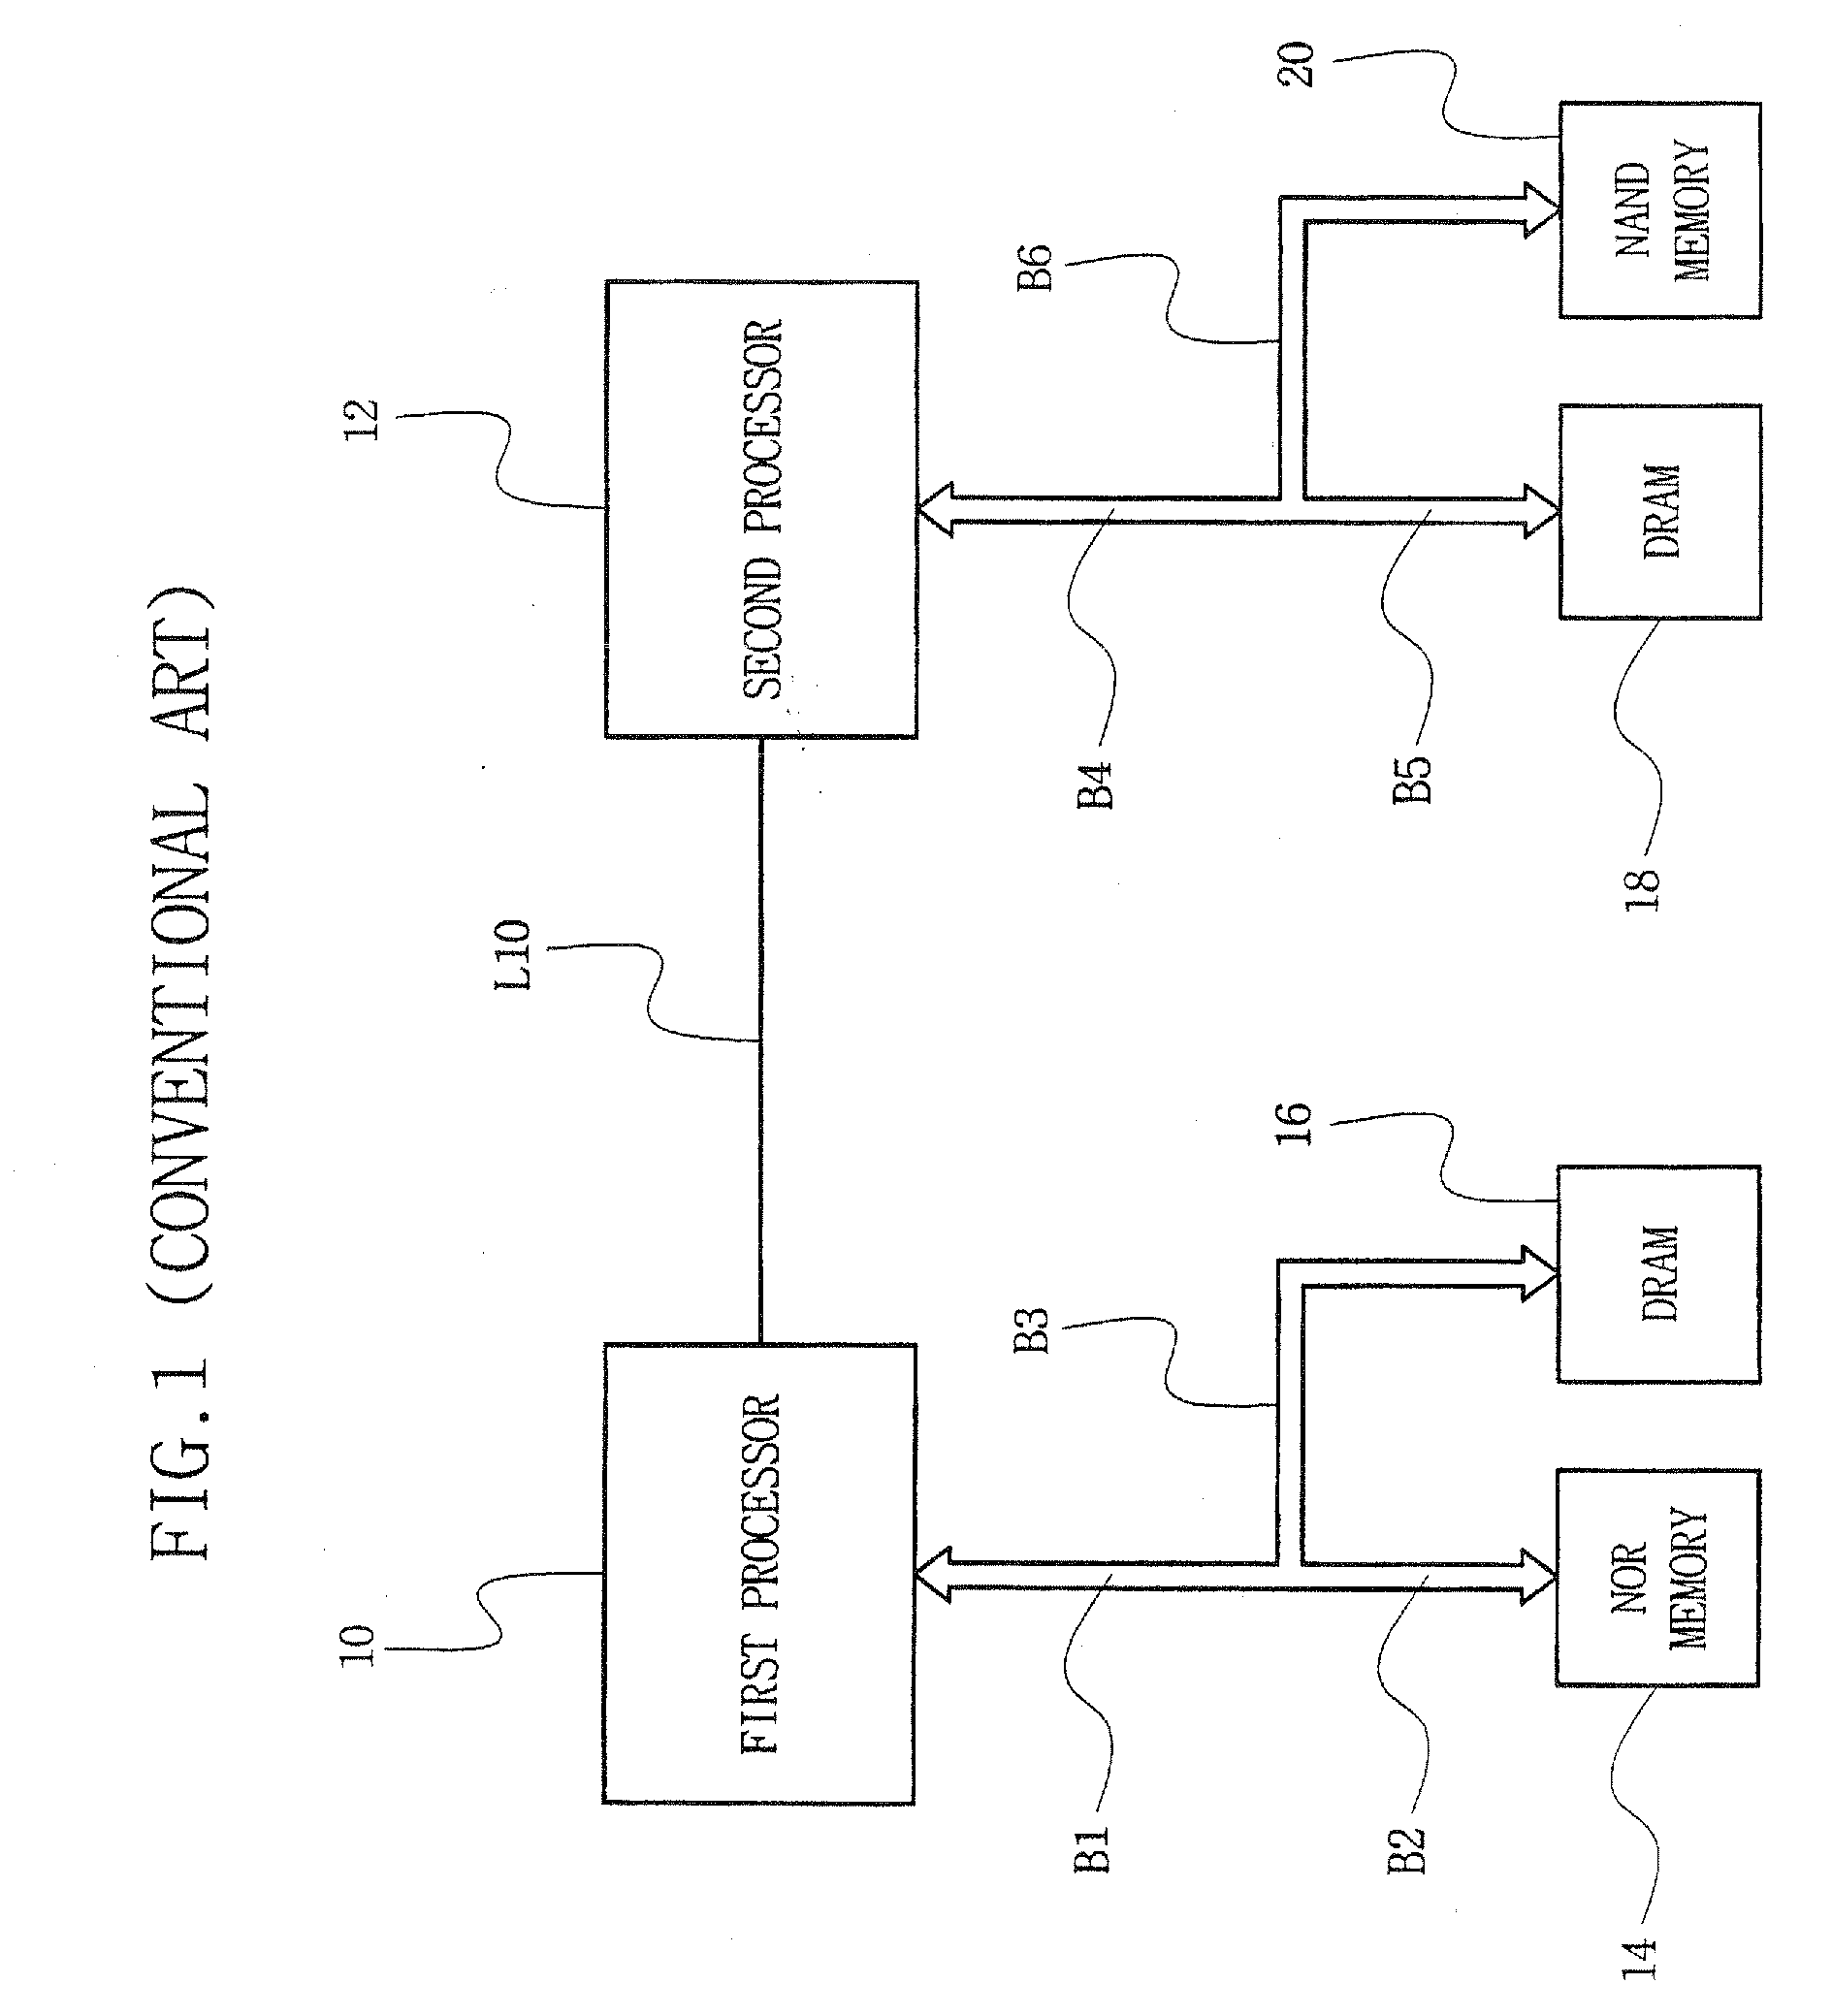 Multipath accessible semiconductor memory device with host interface between processors